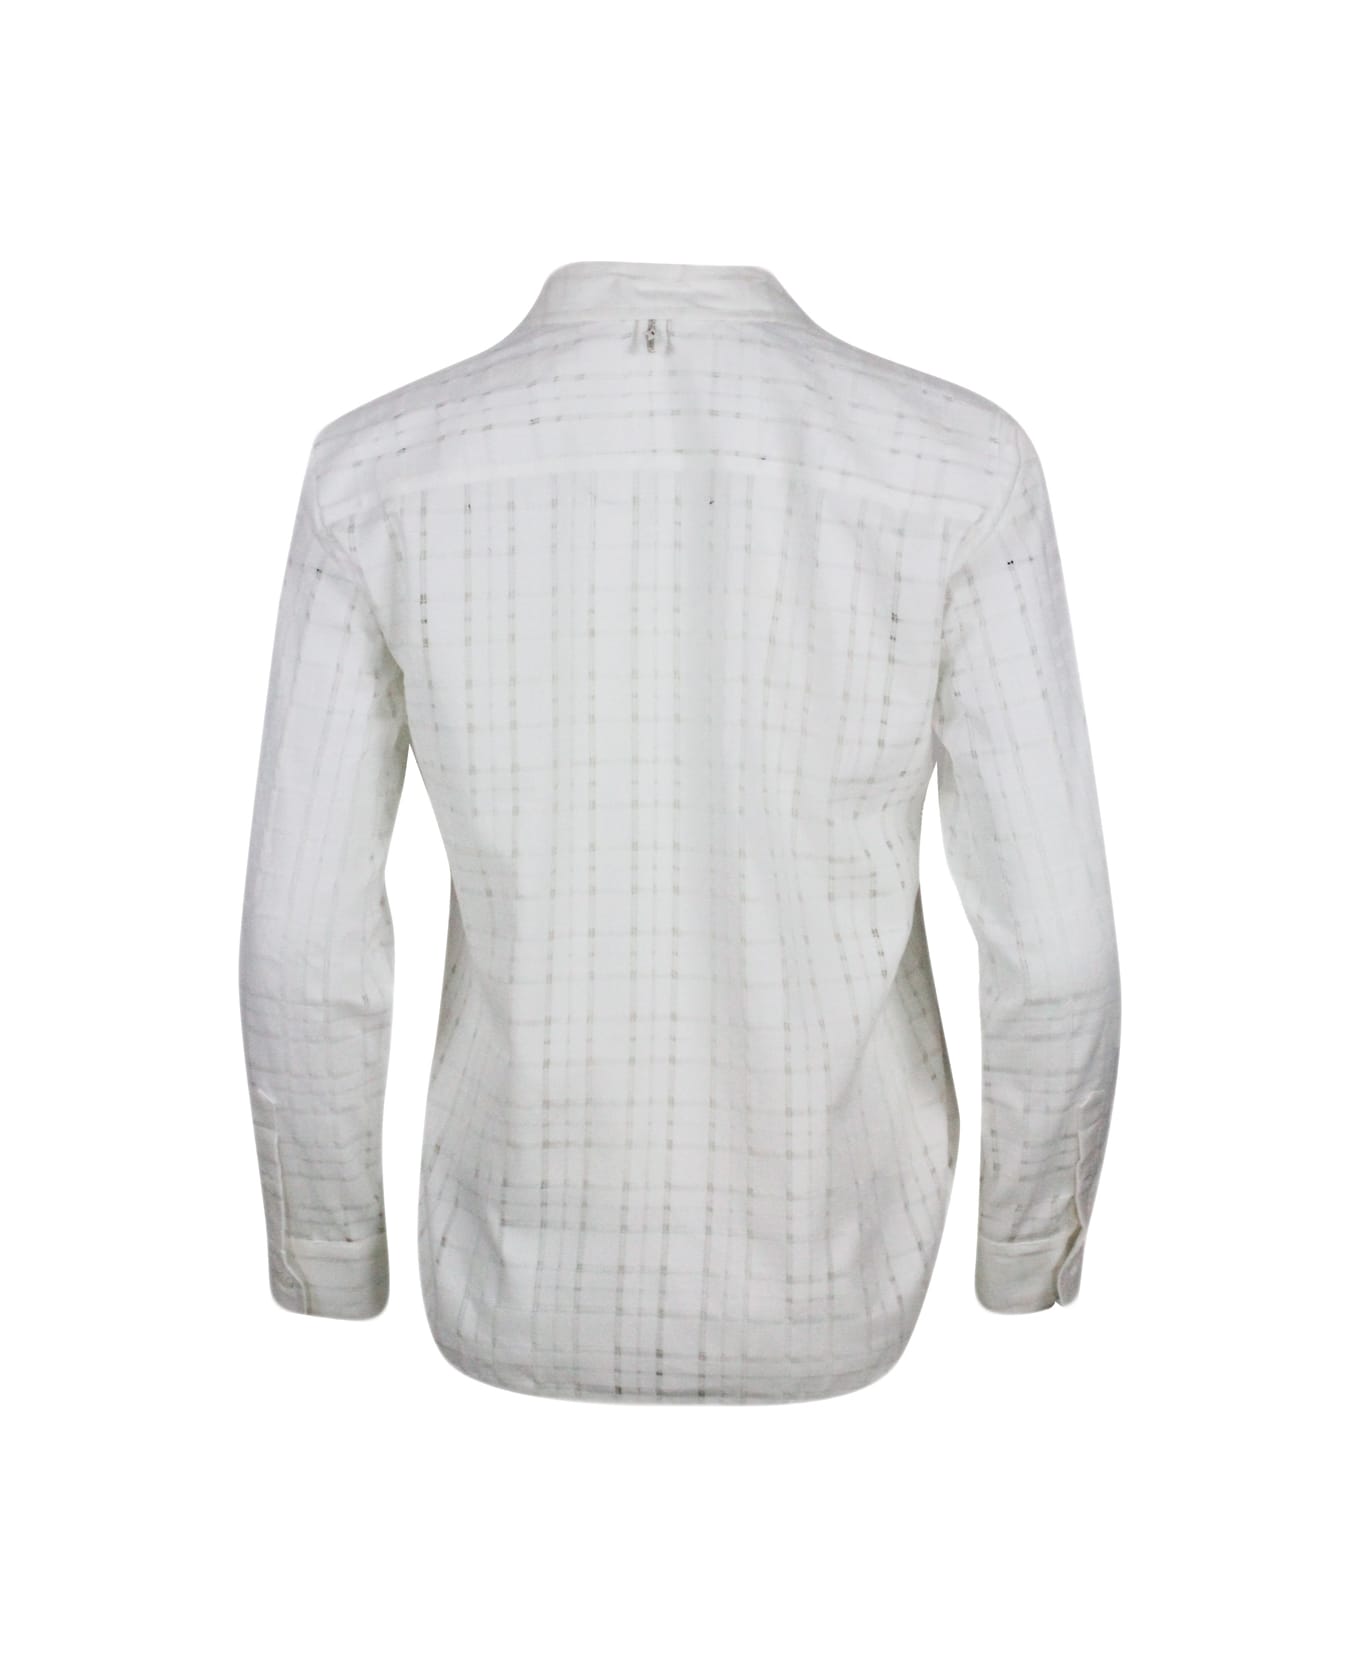 Lorena Antoniazzi Long-sleeved Shirt In Stretch Cotton With Perforated Window Work And Including Coordinated Top - cream シャツ